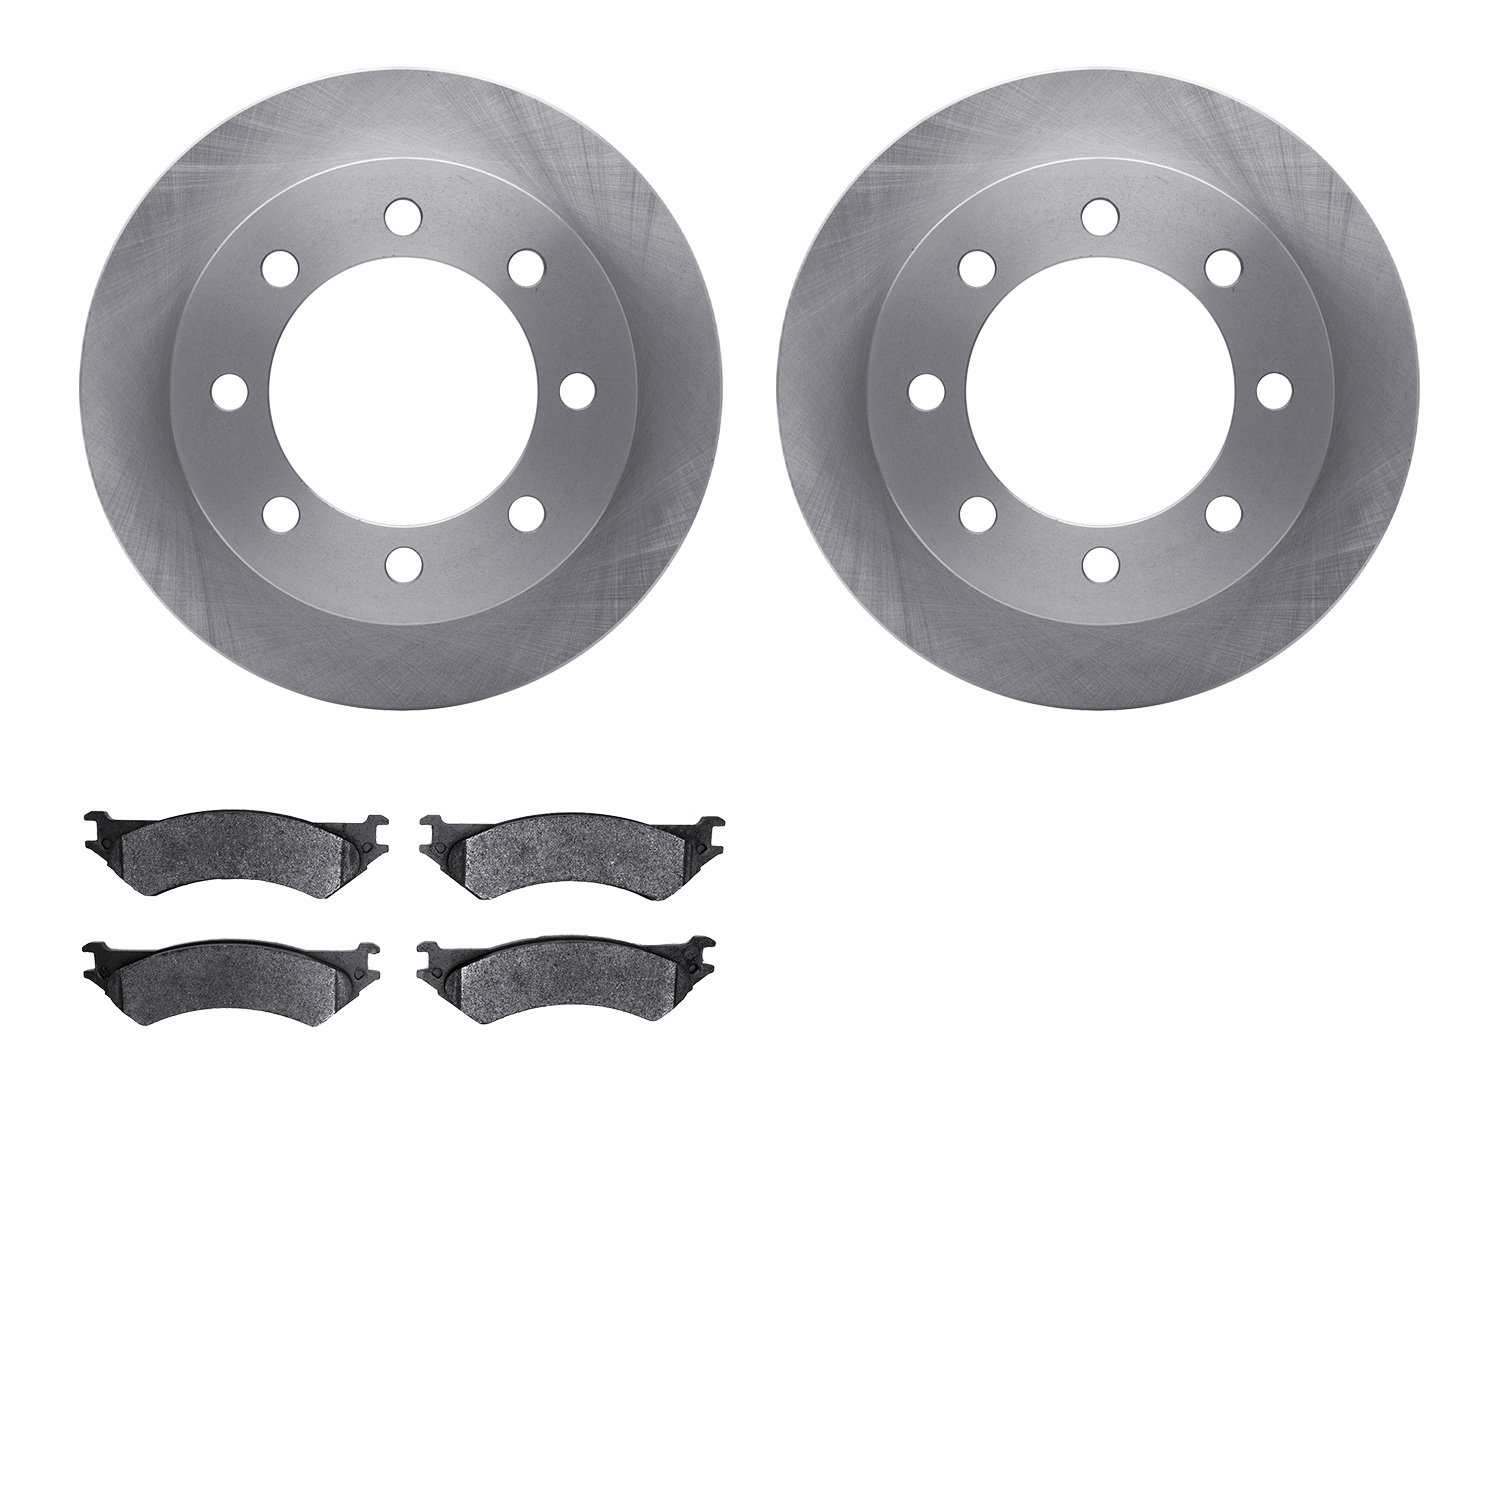 6402-54158 Brake Rotors with Ultimate-Duty Brake Pads, 1999-2007 Ford/Lincoln/Mercury/Mazda, Position: Rear